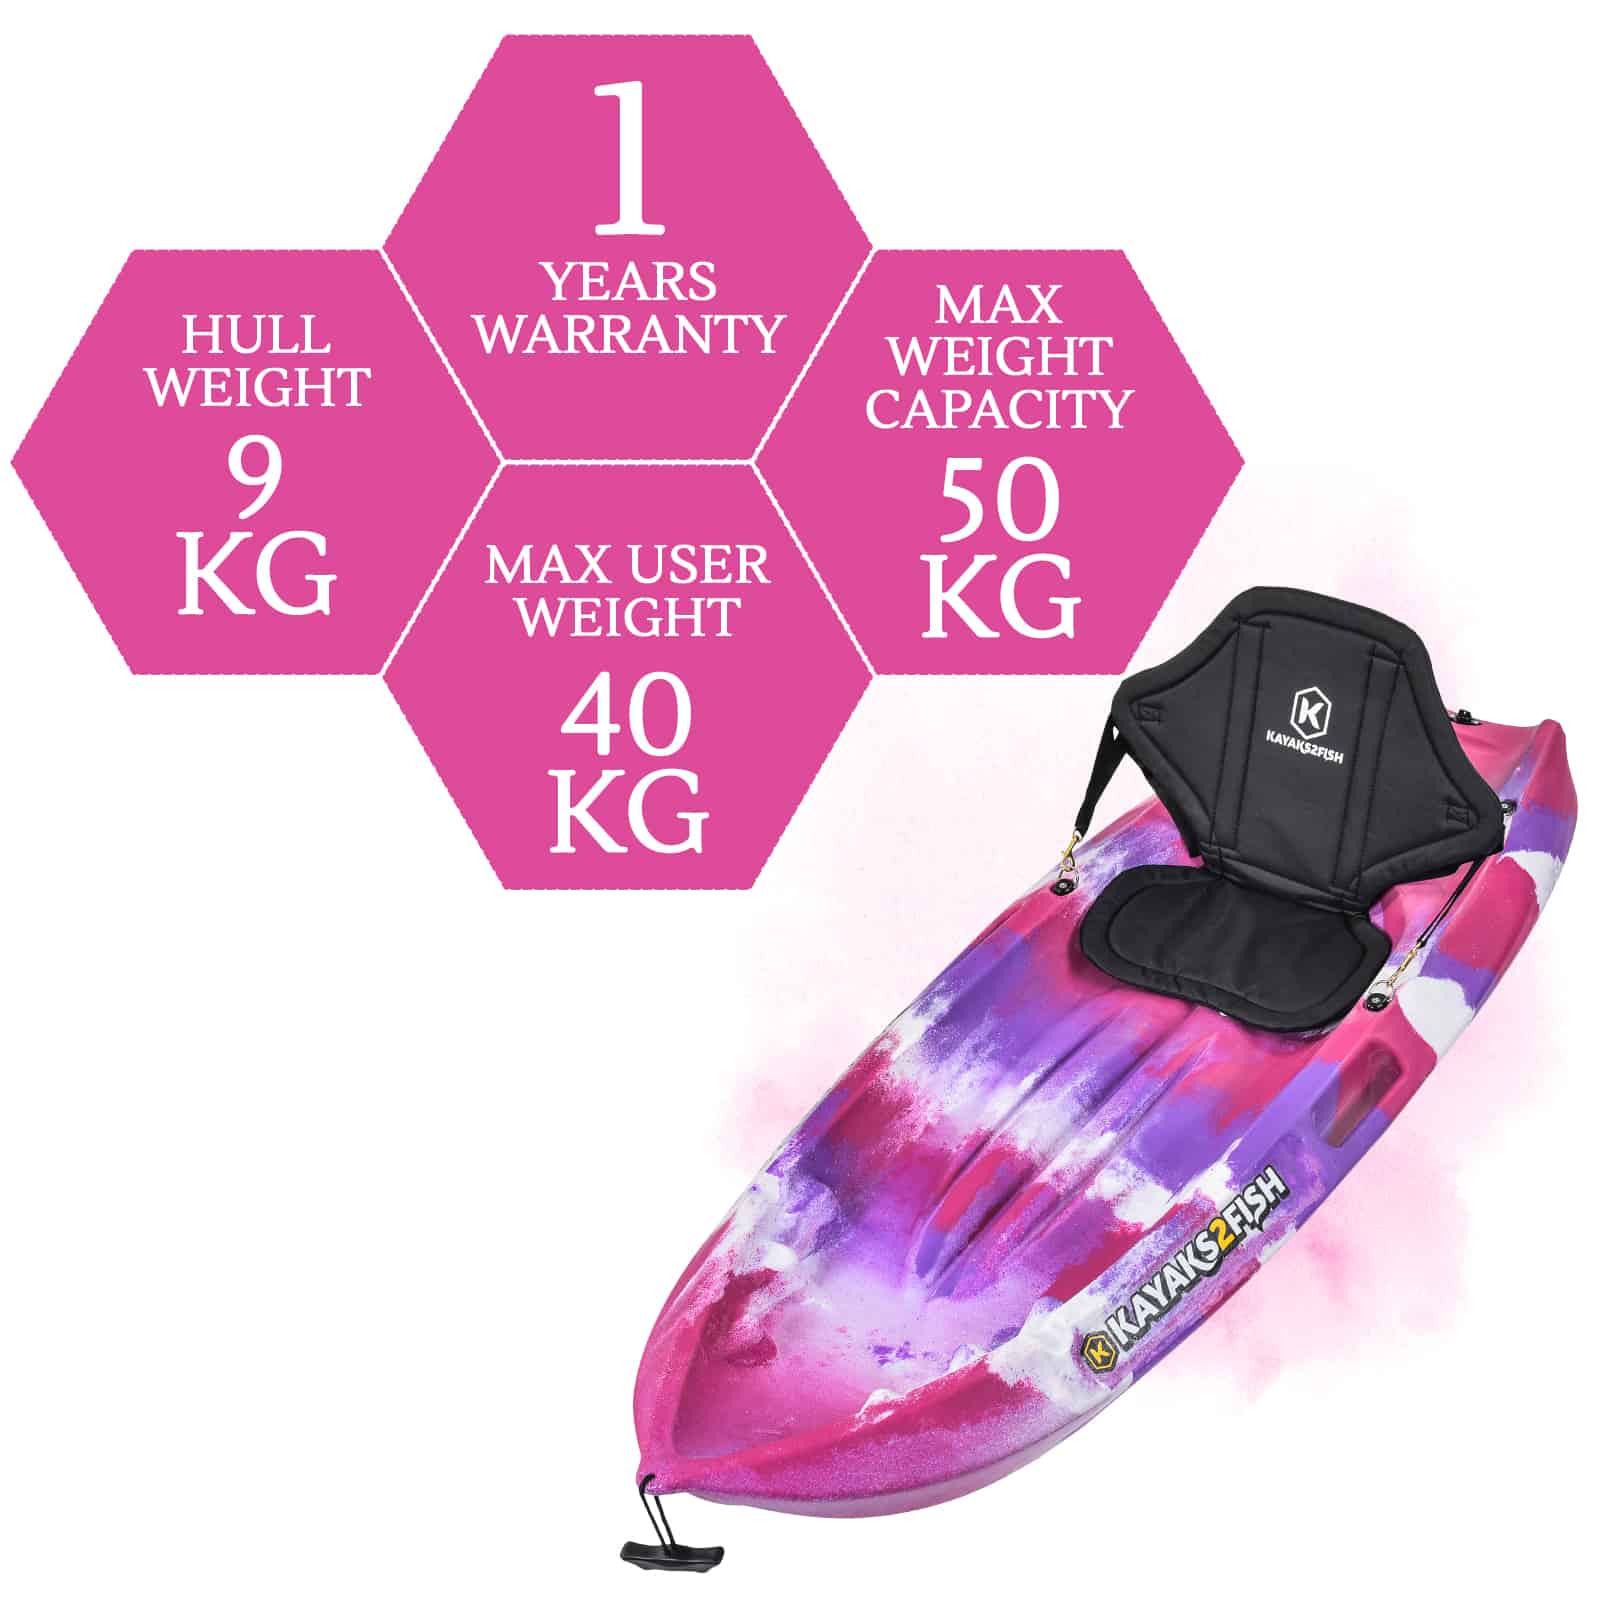 K2FR-PUFFIN-PINKCAMO specifications